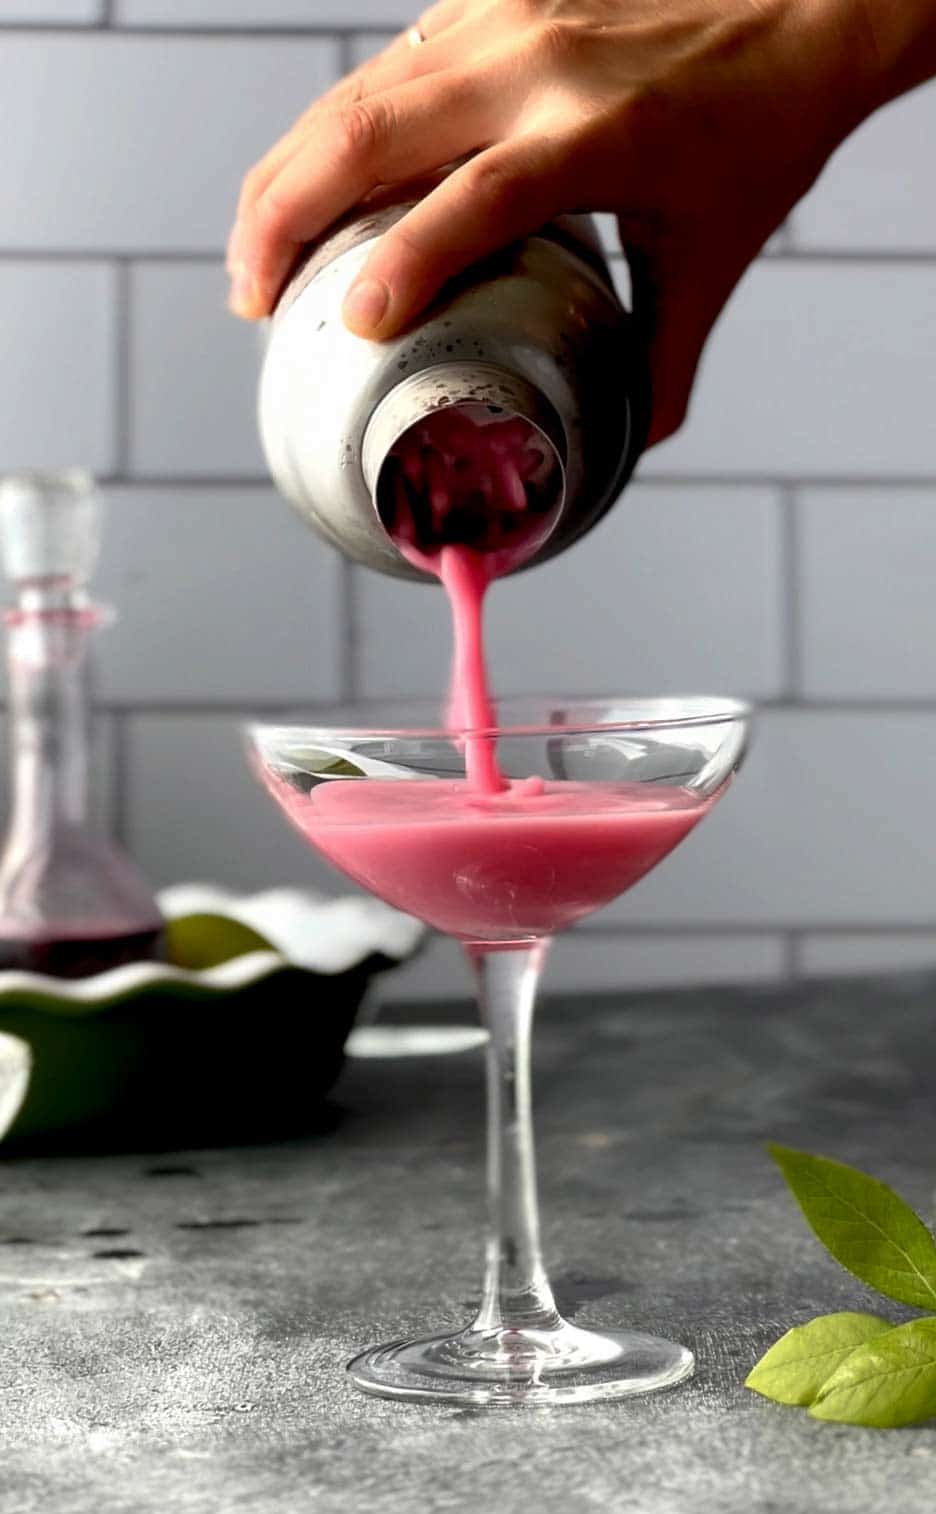 Blueberry Pie Martini is a decadent fresh blueberry cocktail recipe that tastes like a slice of blueberry cream pie or blueberry pie ala mode in a glass. blueberry pie | blueberry vodka | blueberry drink | blueberry cocktail | blueberry martini | blueberry vodka cocktail | blueberry vodka martini | blueberry pie shot